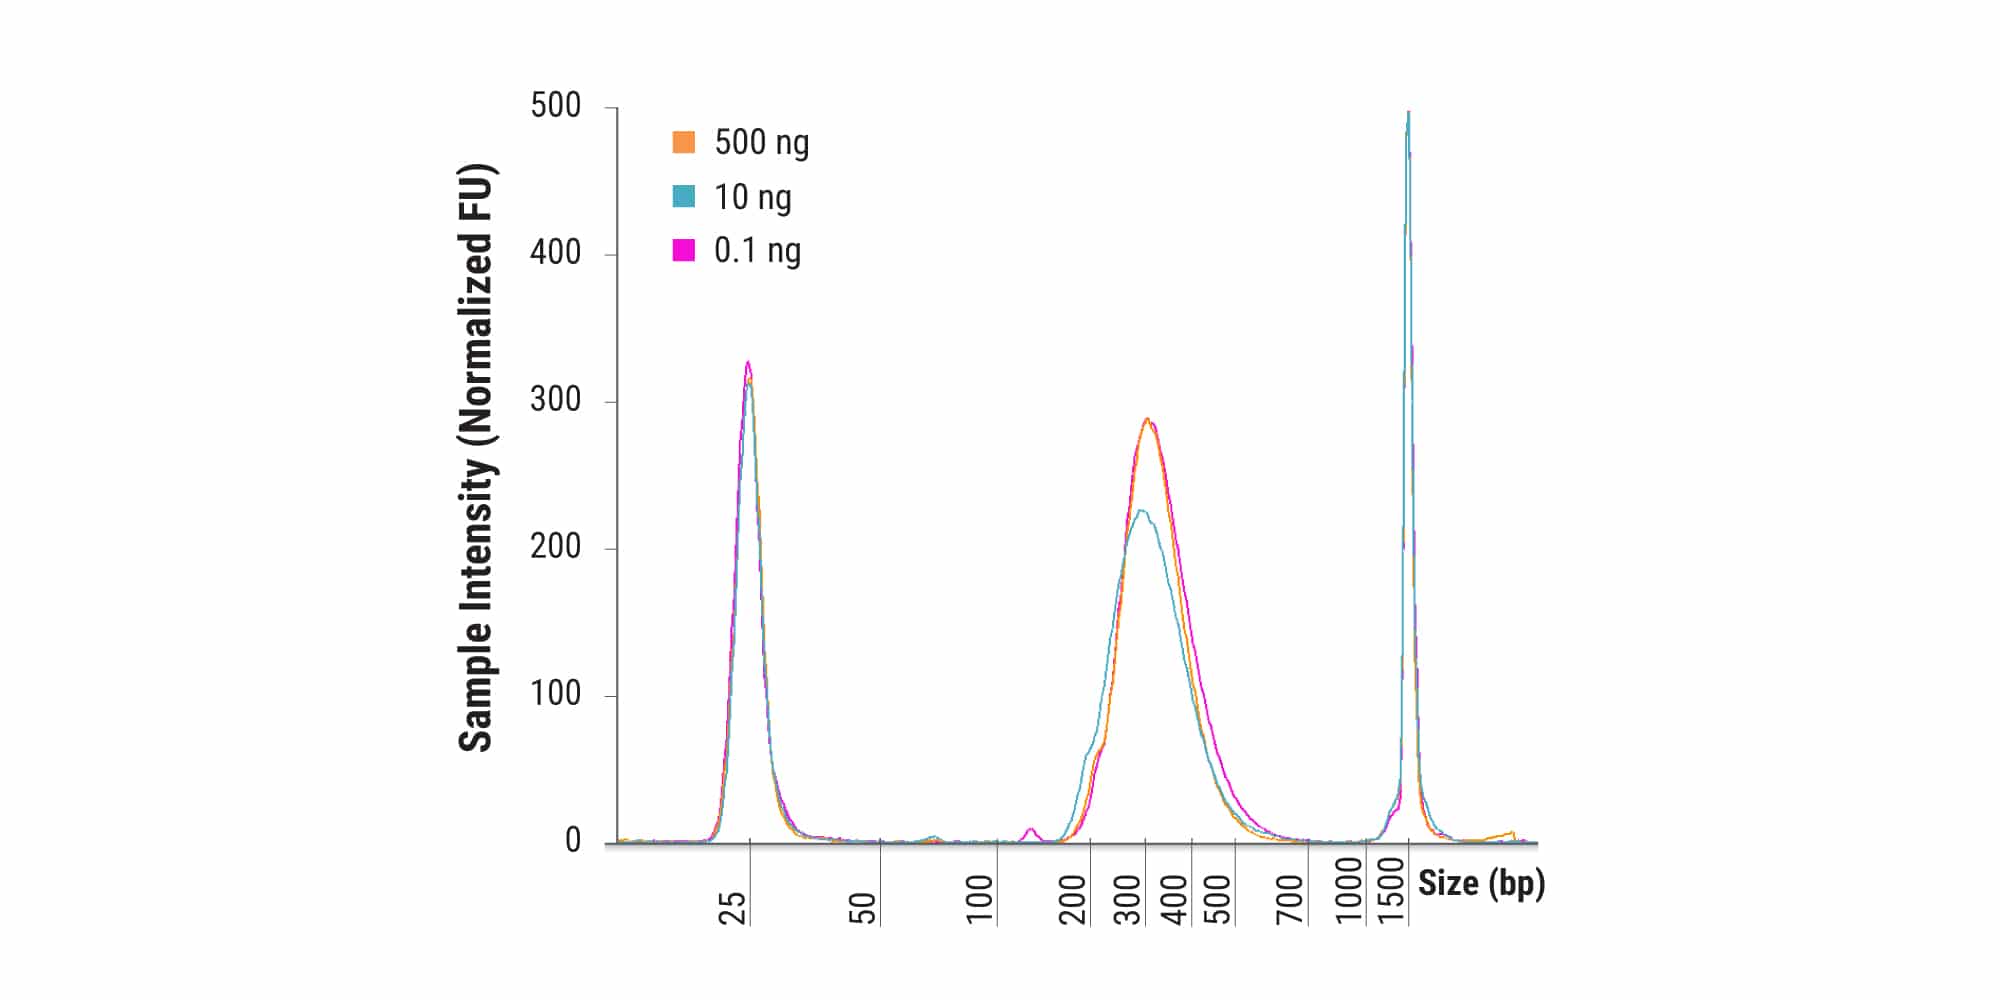 Figure 4A. Consistent fragmentation across a 5,000-fold range of DNA input amounts. Libraries were constructed in duplicate from 500, 10, and 0.1 ng of human genomic DNA fragmented for 20 minutes at 30℃. Final library distributions were assessed using a D1000 assay by TapeStation (Agilent).